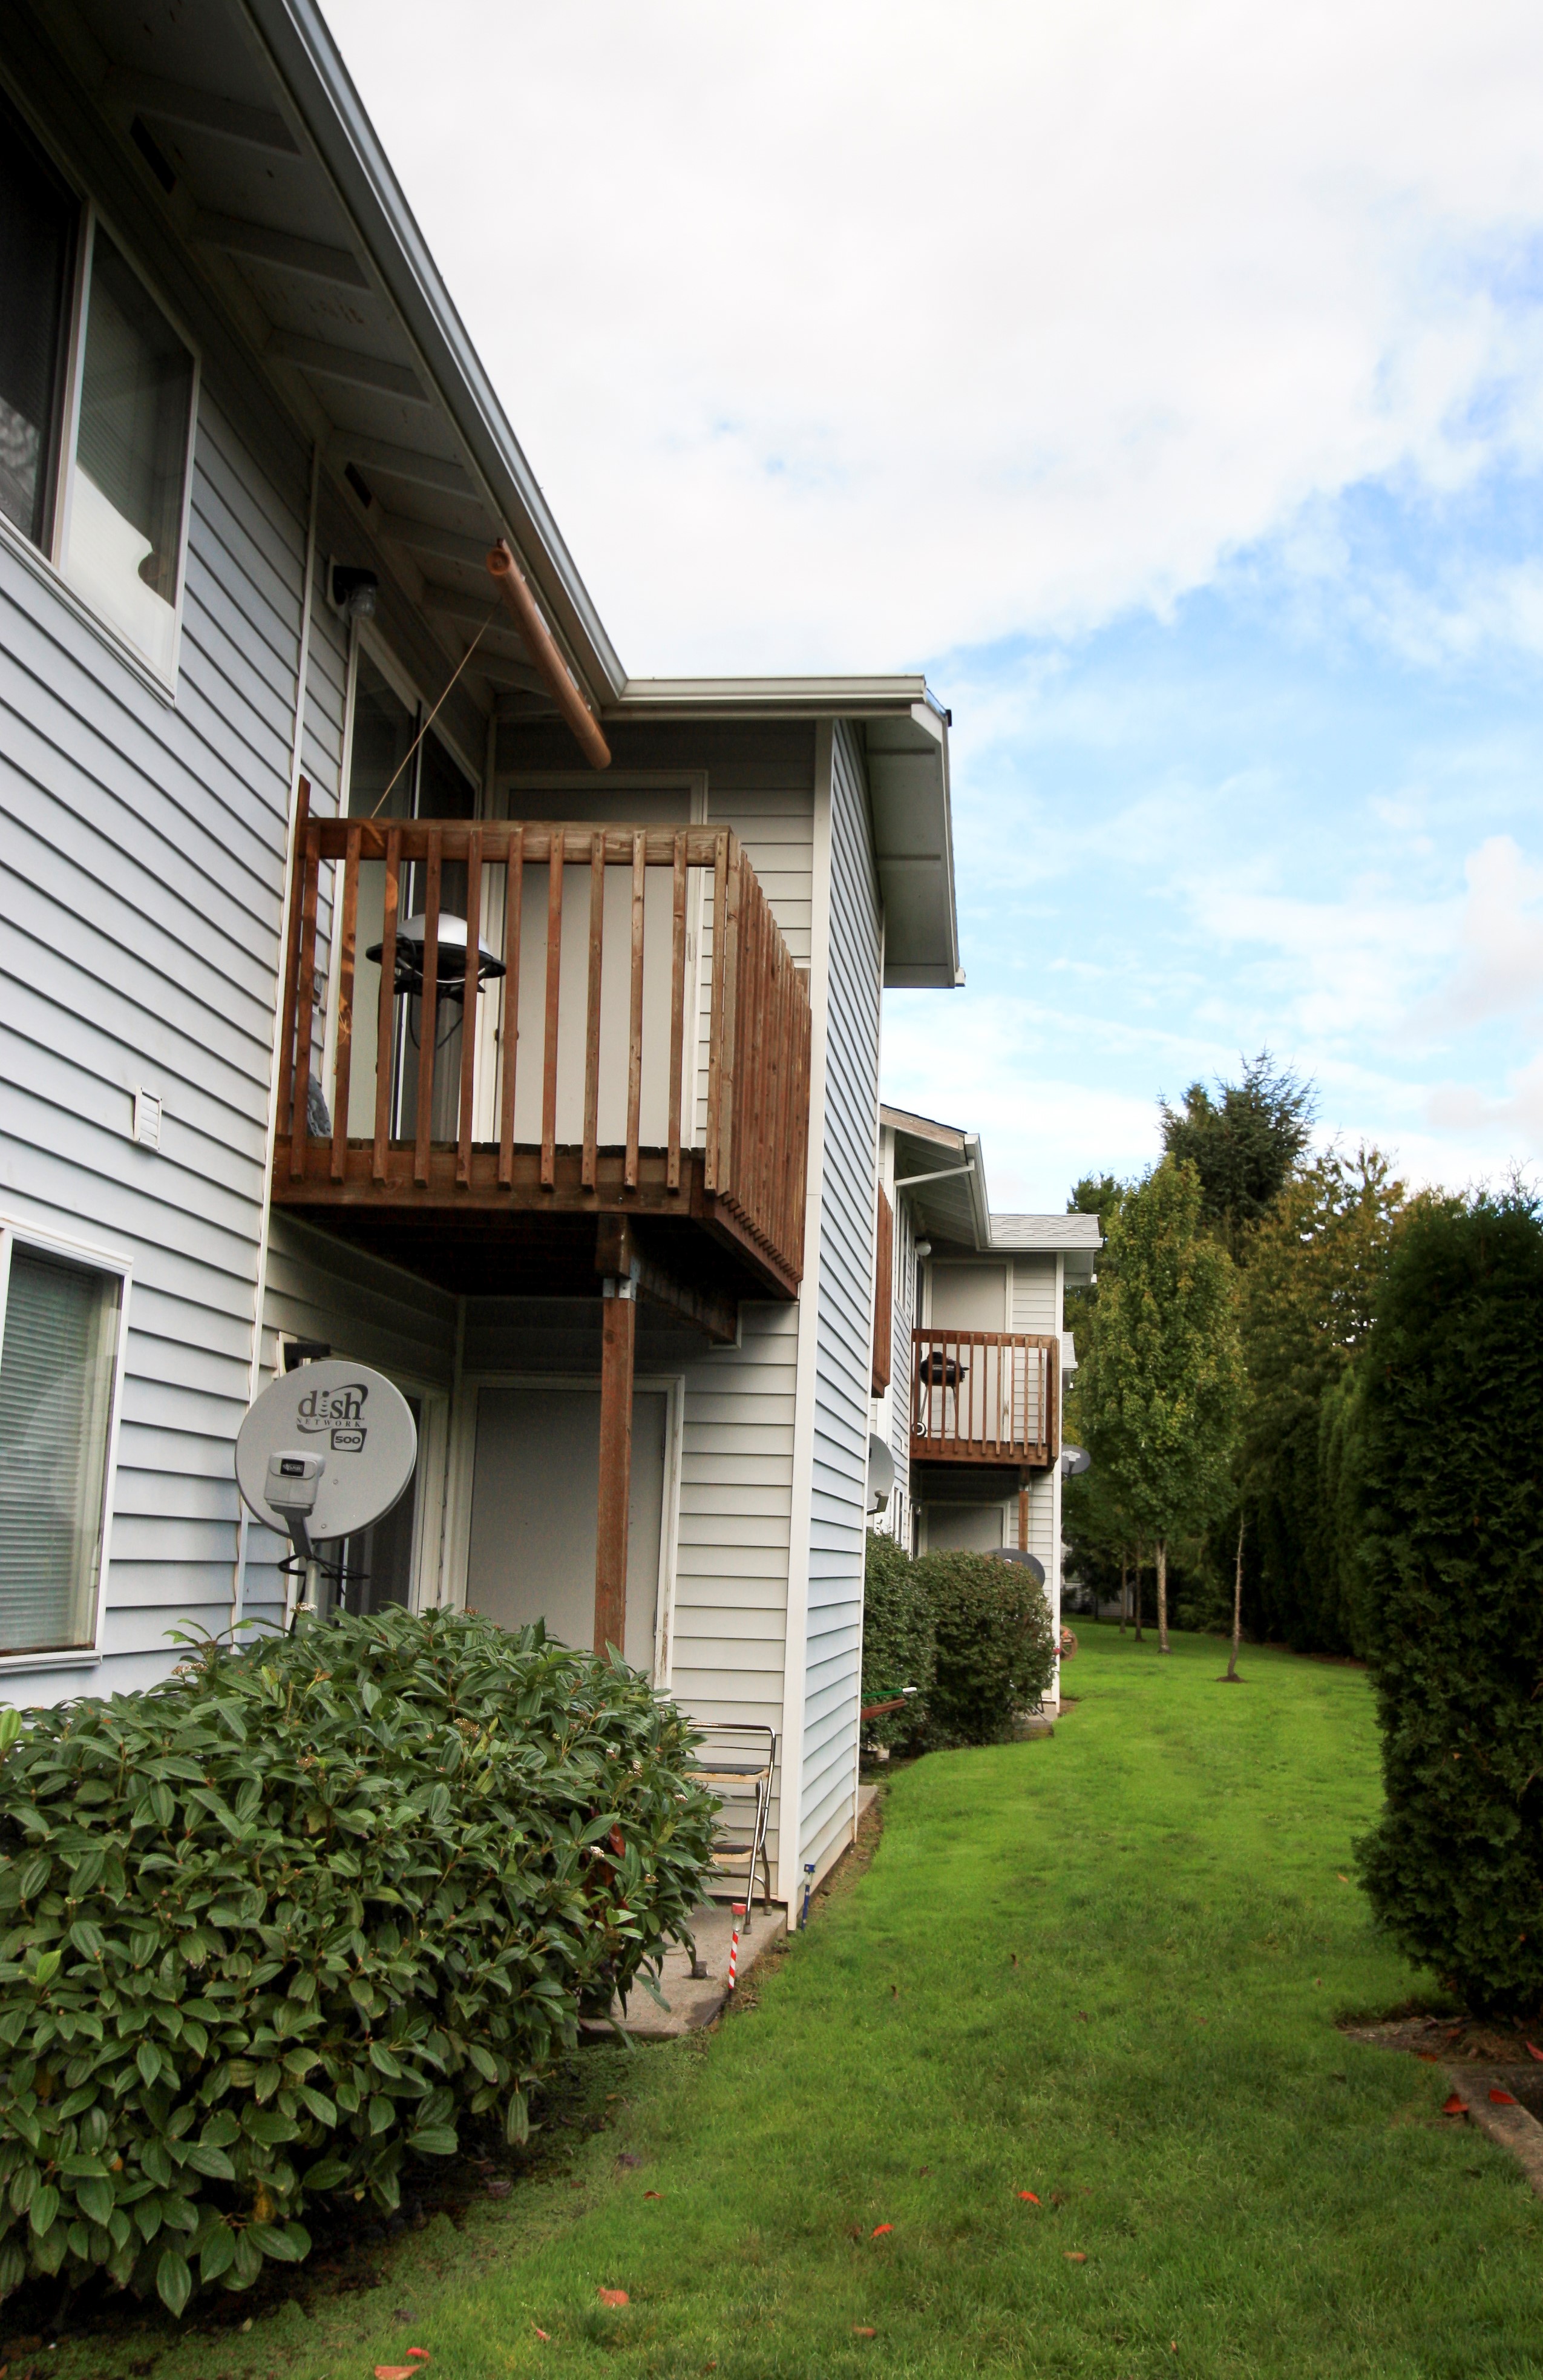 Orchard View Apartments reviews | 138 Bayview Way NE - Salem OR